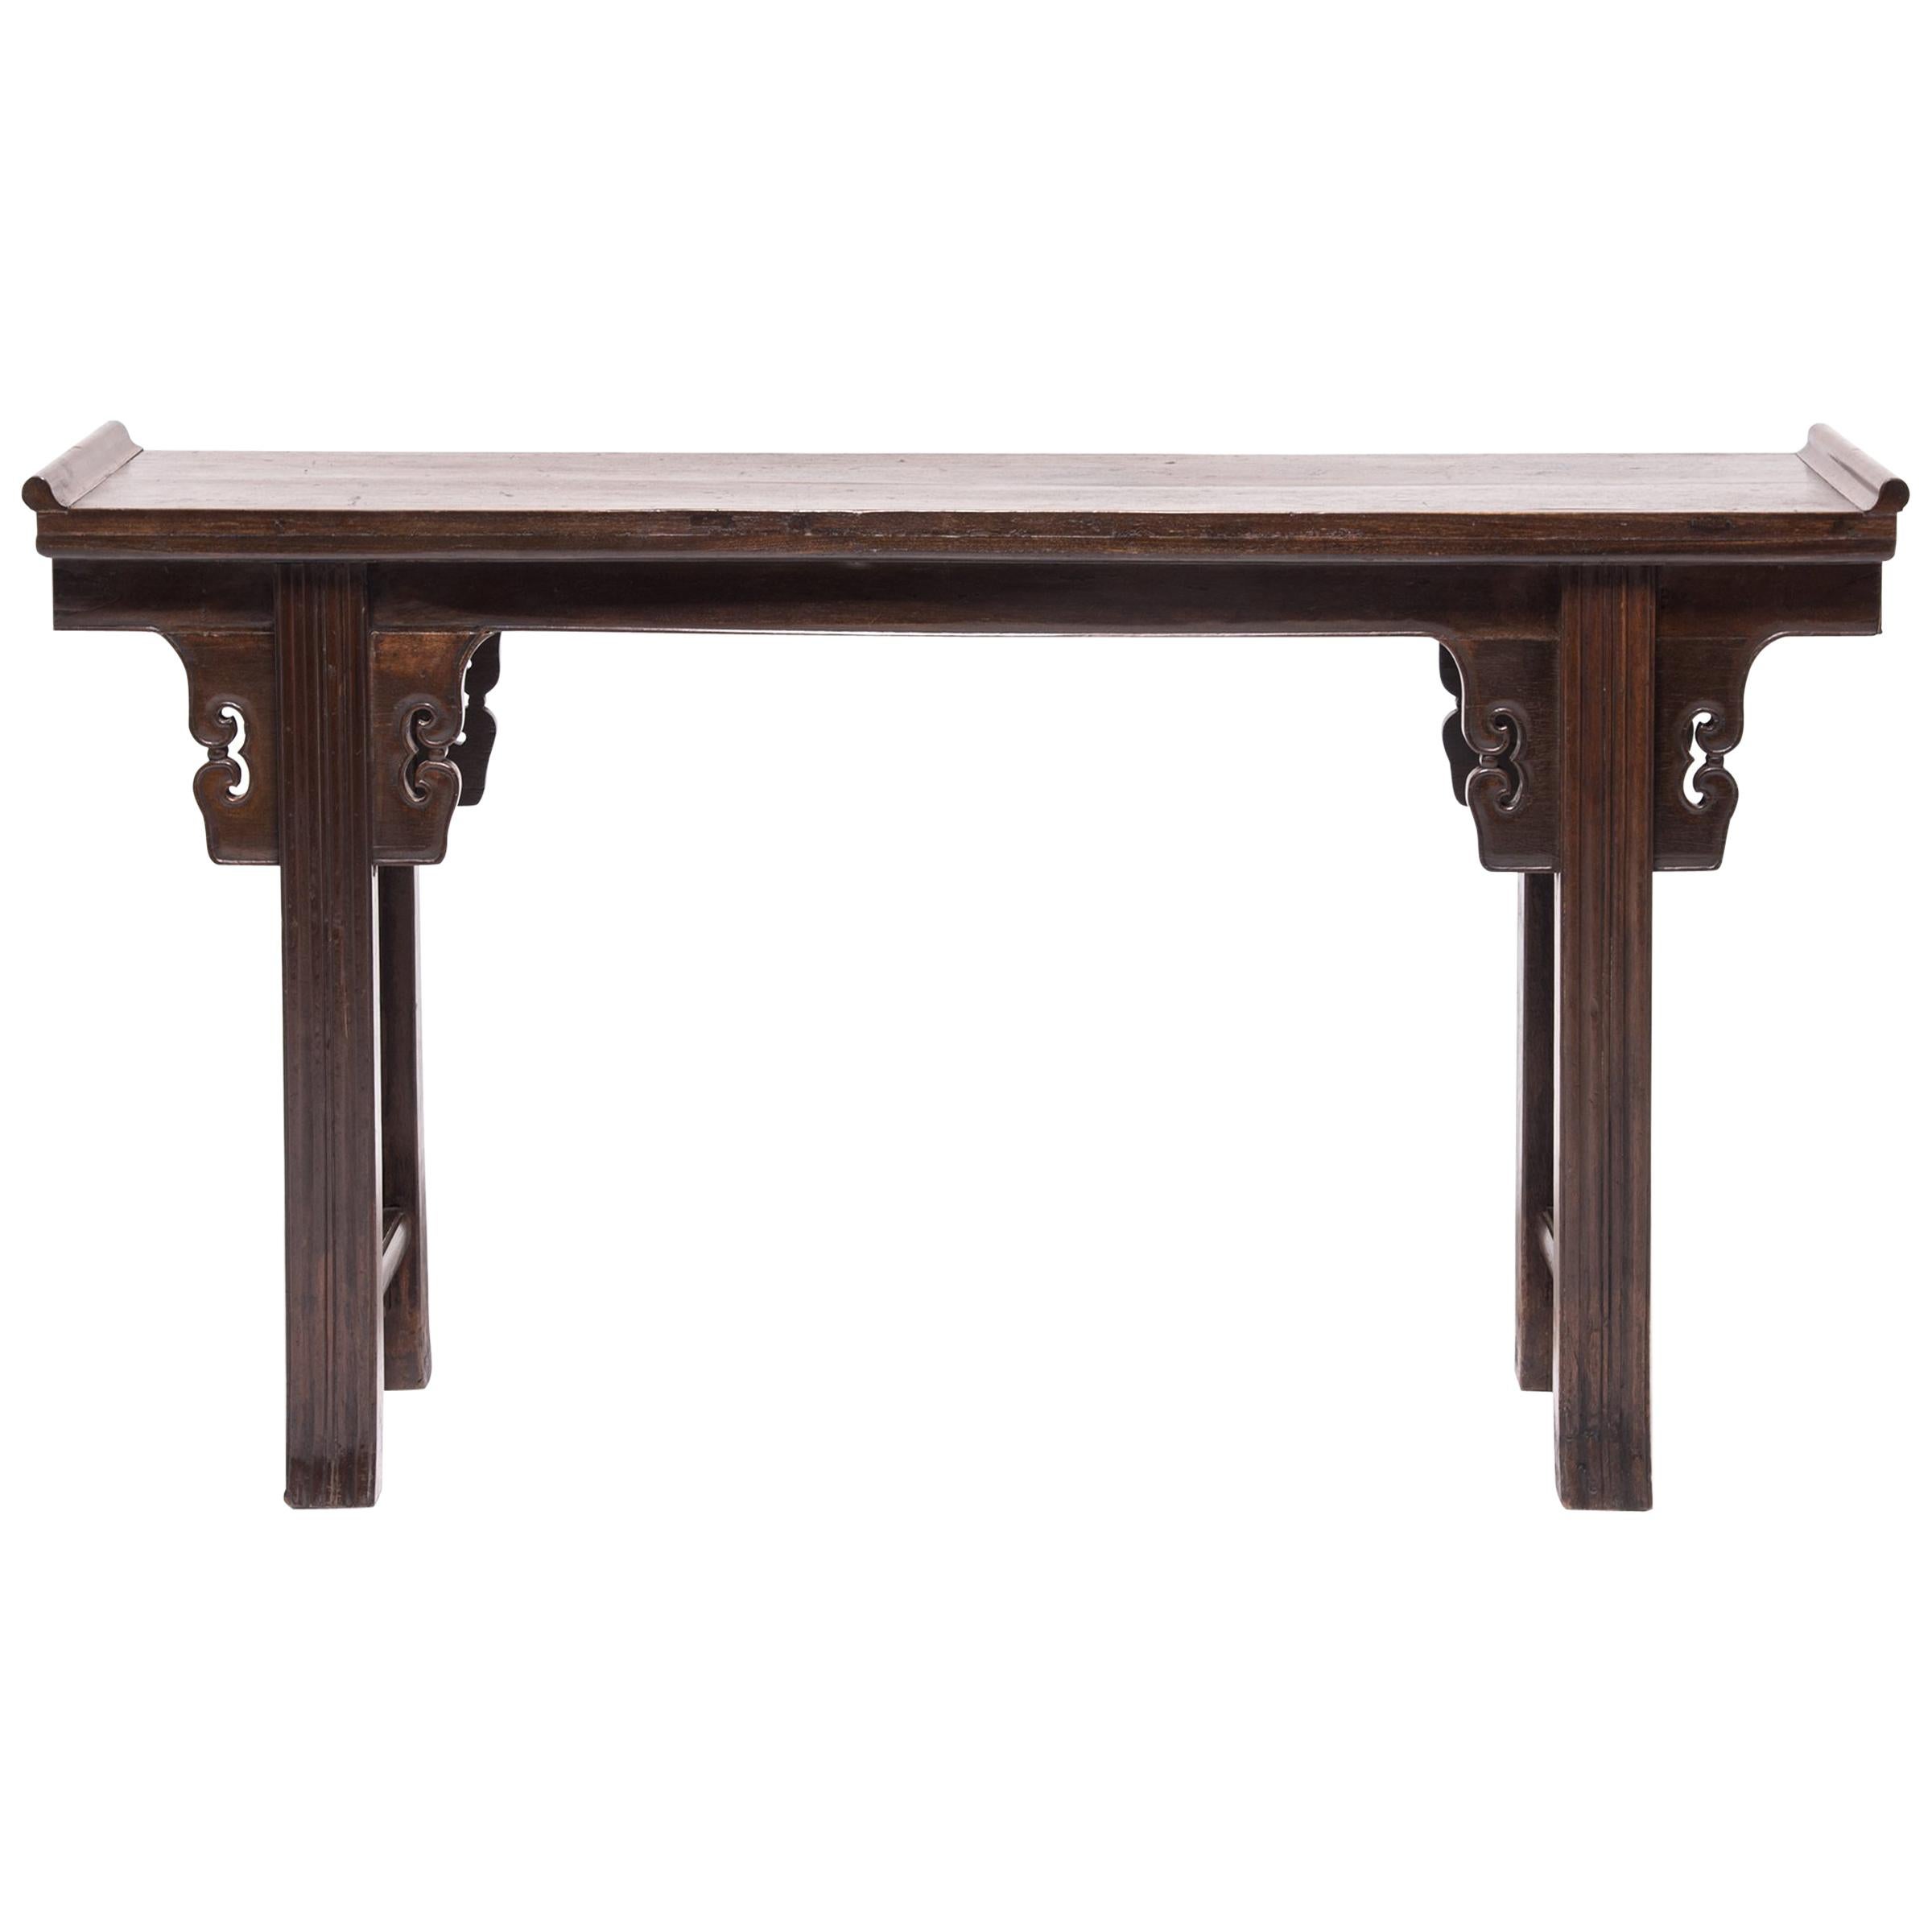 Chinese Altar Console Table with Everted Ends, c. 1850